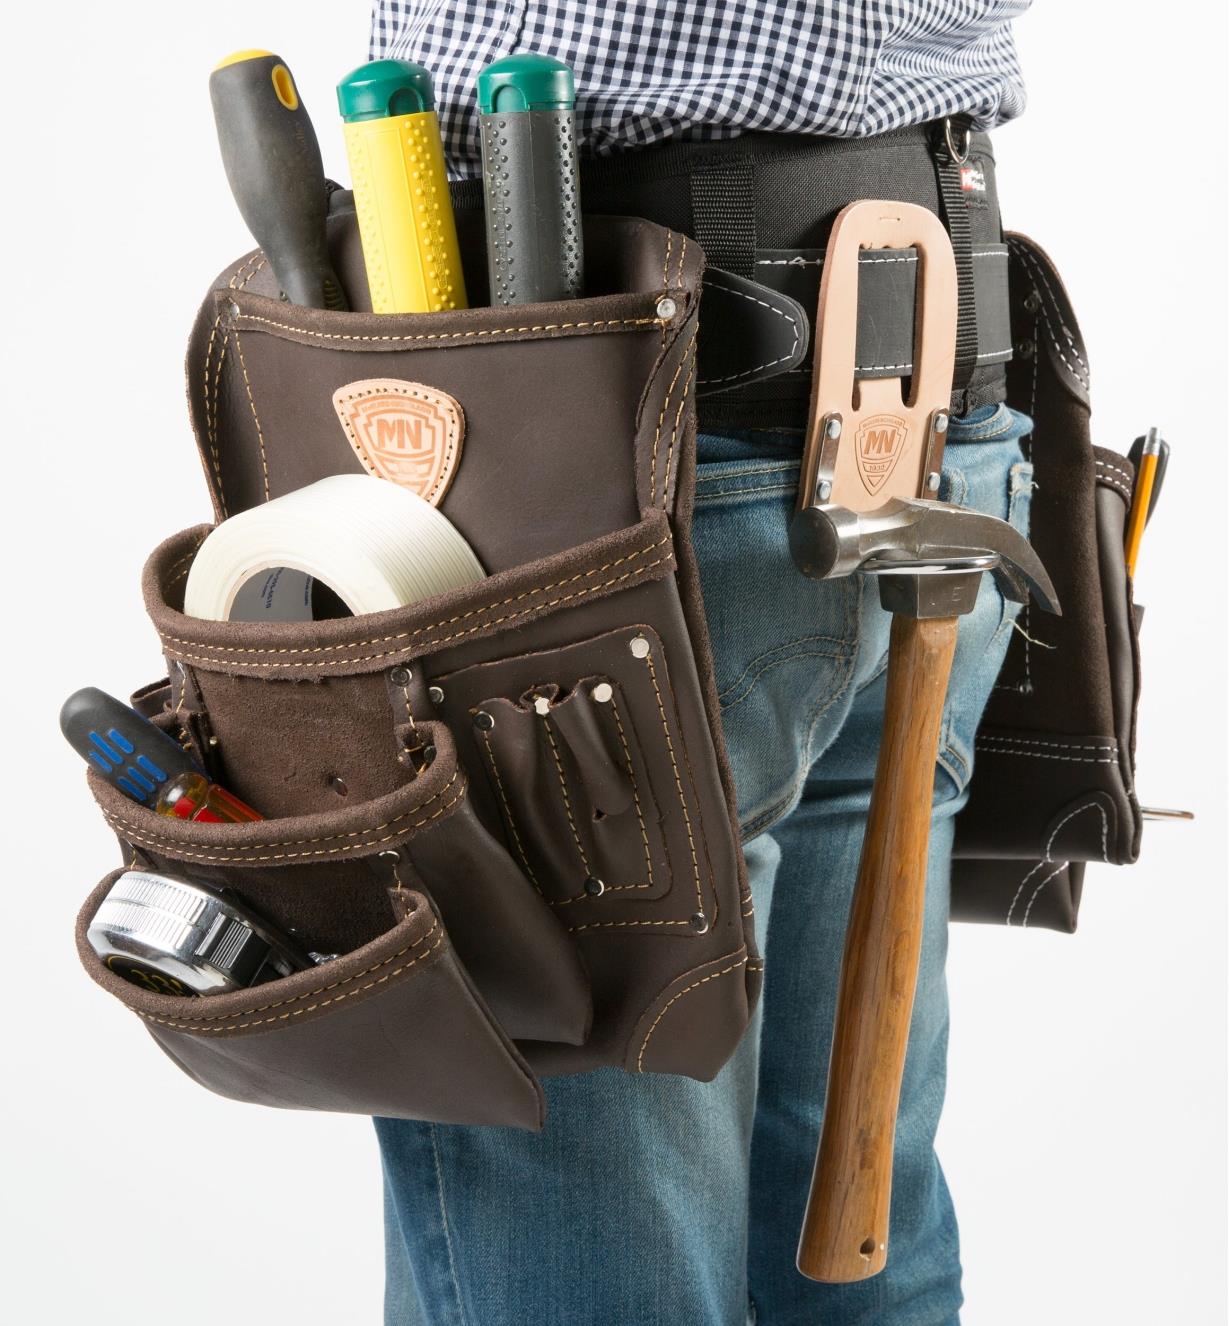 What Goes In A Carpenter Tool Belt